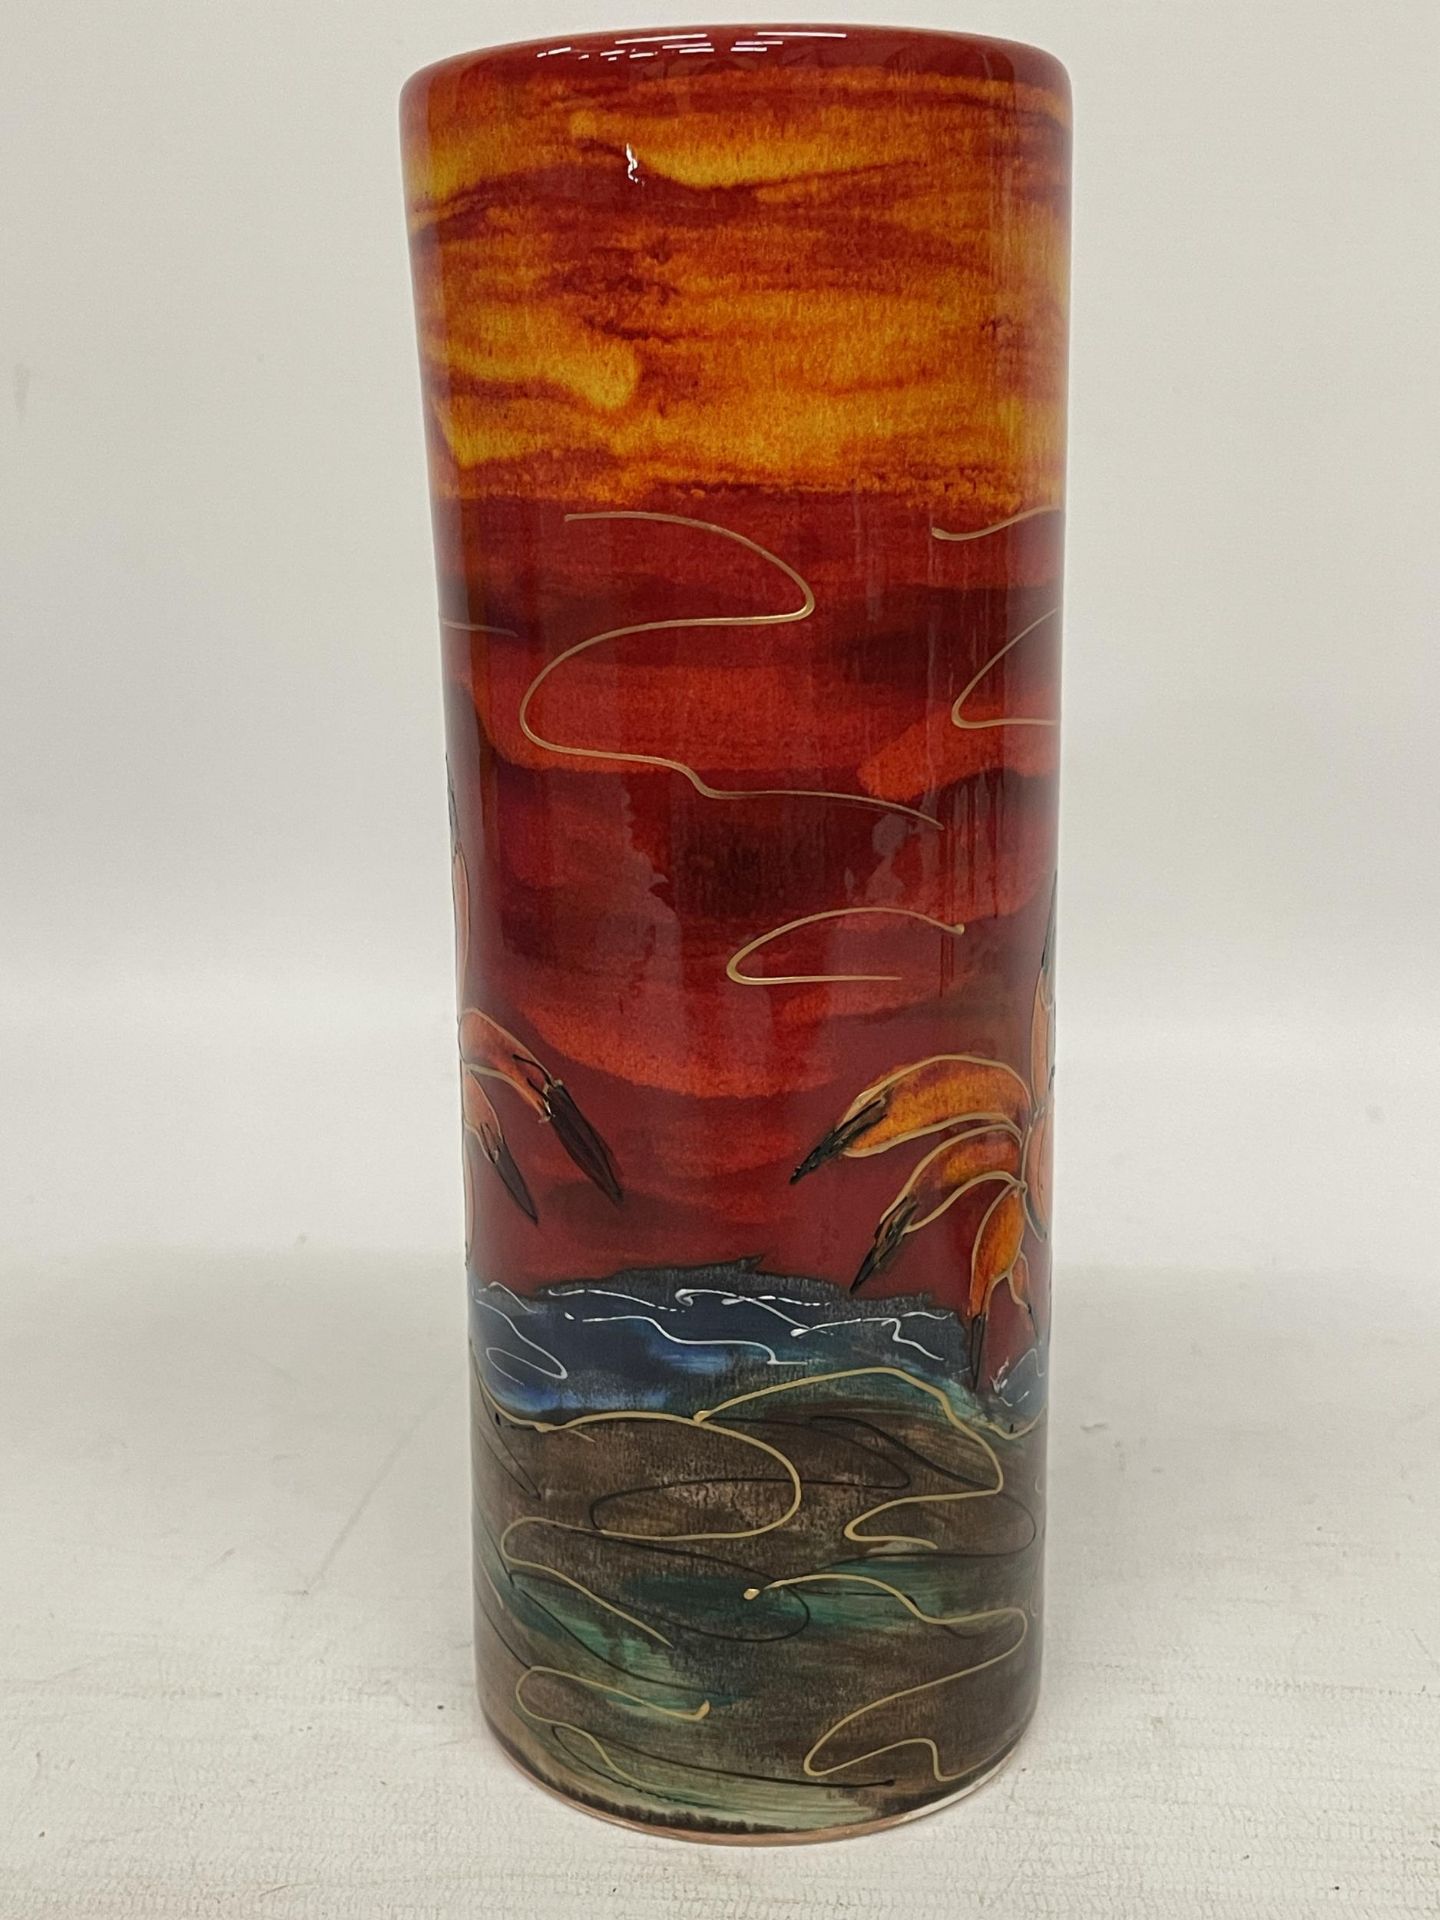 AN ANITA HARRIS HAND PAINTED AND SIGNED IN GOLD CRAB VASE - Image 2 of 4